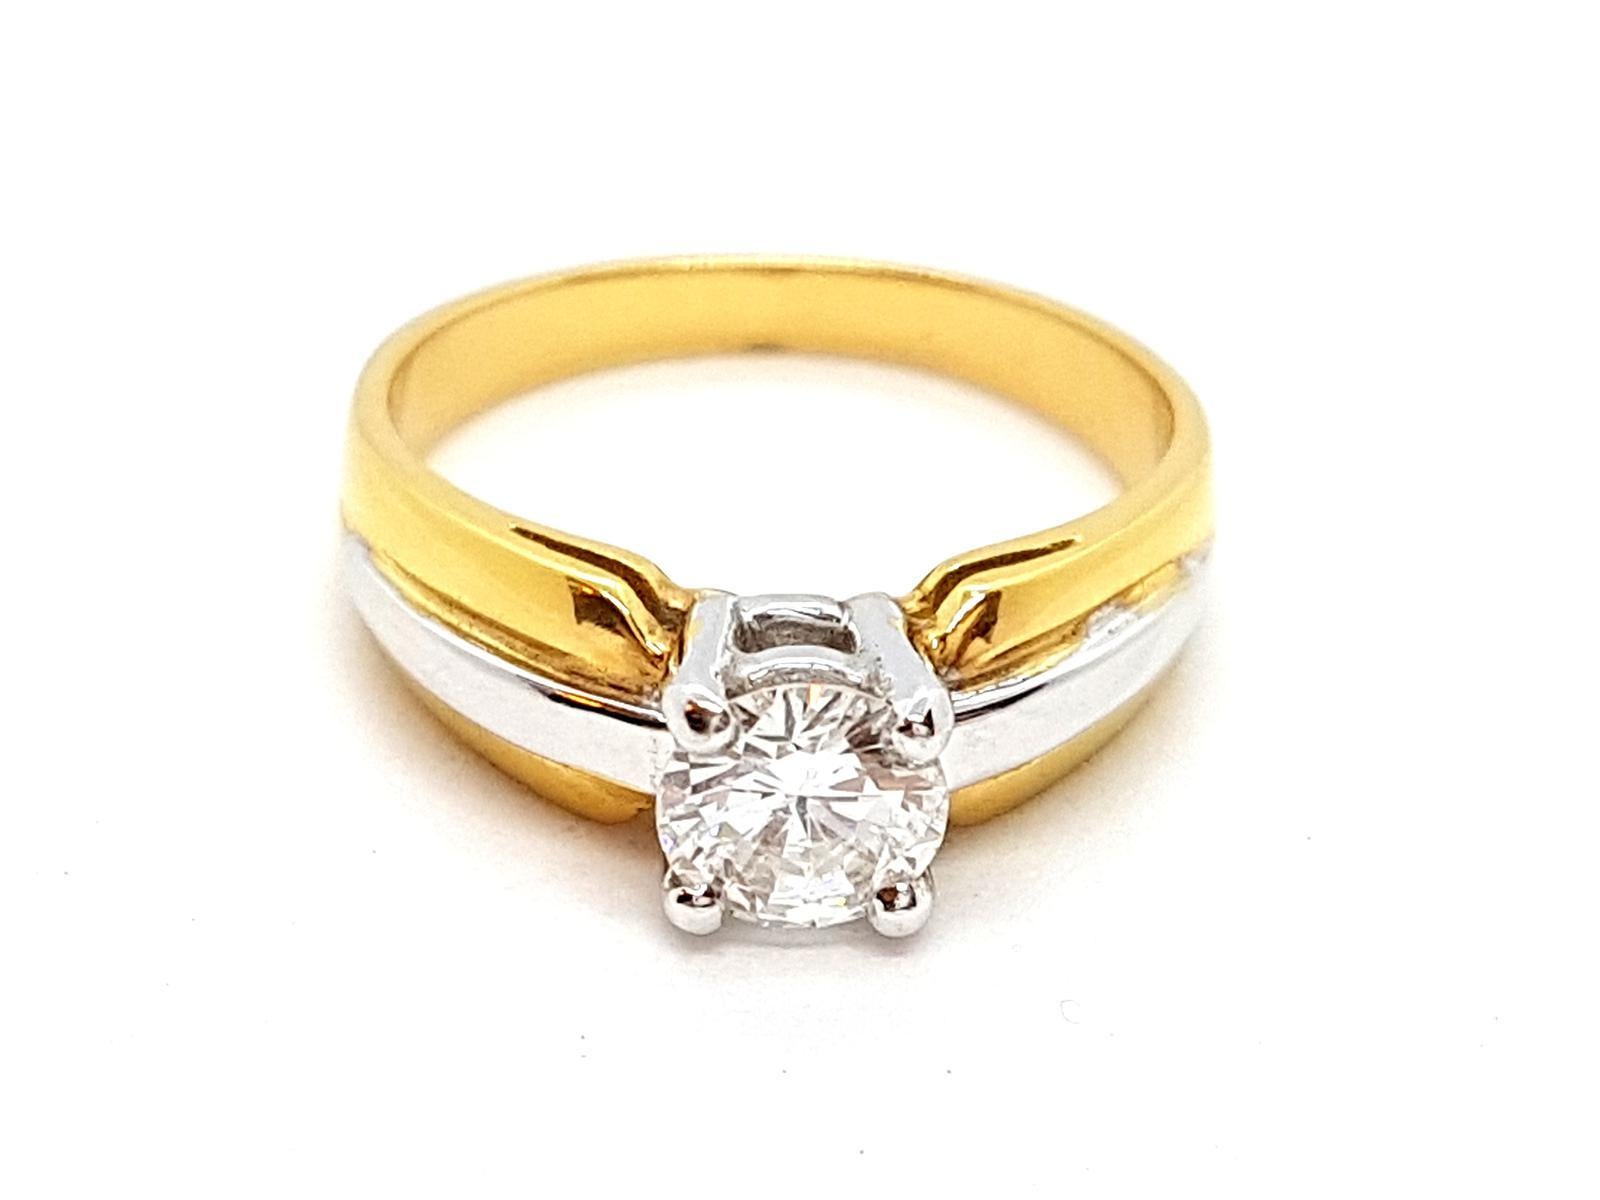 Solitaire in gold 750 thousandths (18 carats) two-tone. yellow gold and set on white gold a diamond. brilliant size  of about 0.80 ct. finger circumference: 56. width on top: 0.6 cm. total weight: 5.56 g. new condition. eagle head hallmark

